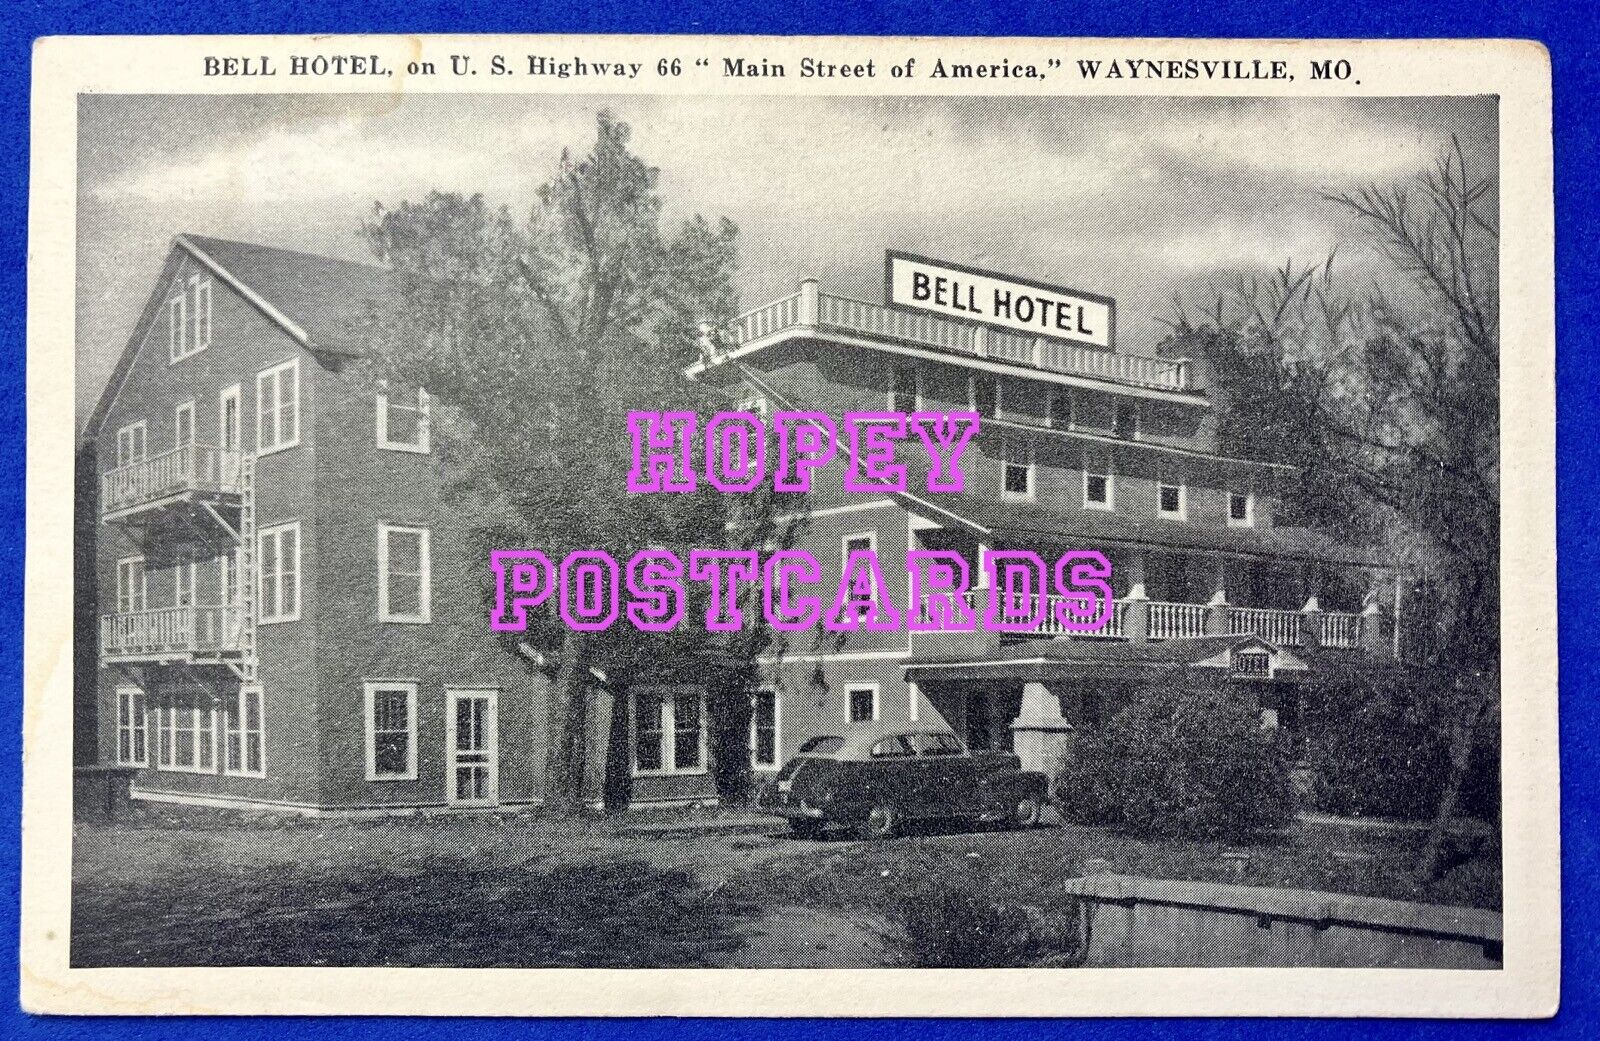 ROUTE 66~ WAYNESVILLE, MO~ BELL HOTEL IN THE OZARKS ~ B&W PHOTO postcard~ 1940s 